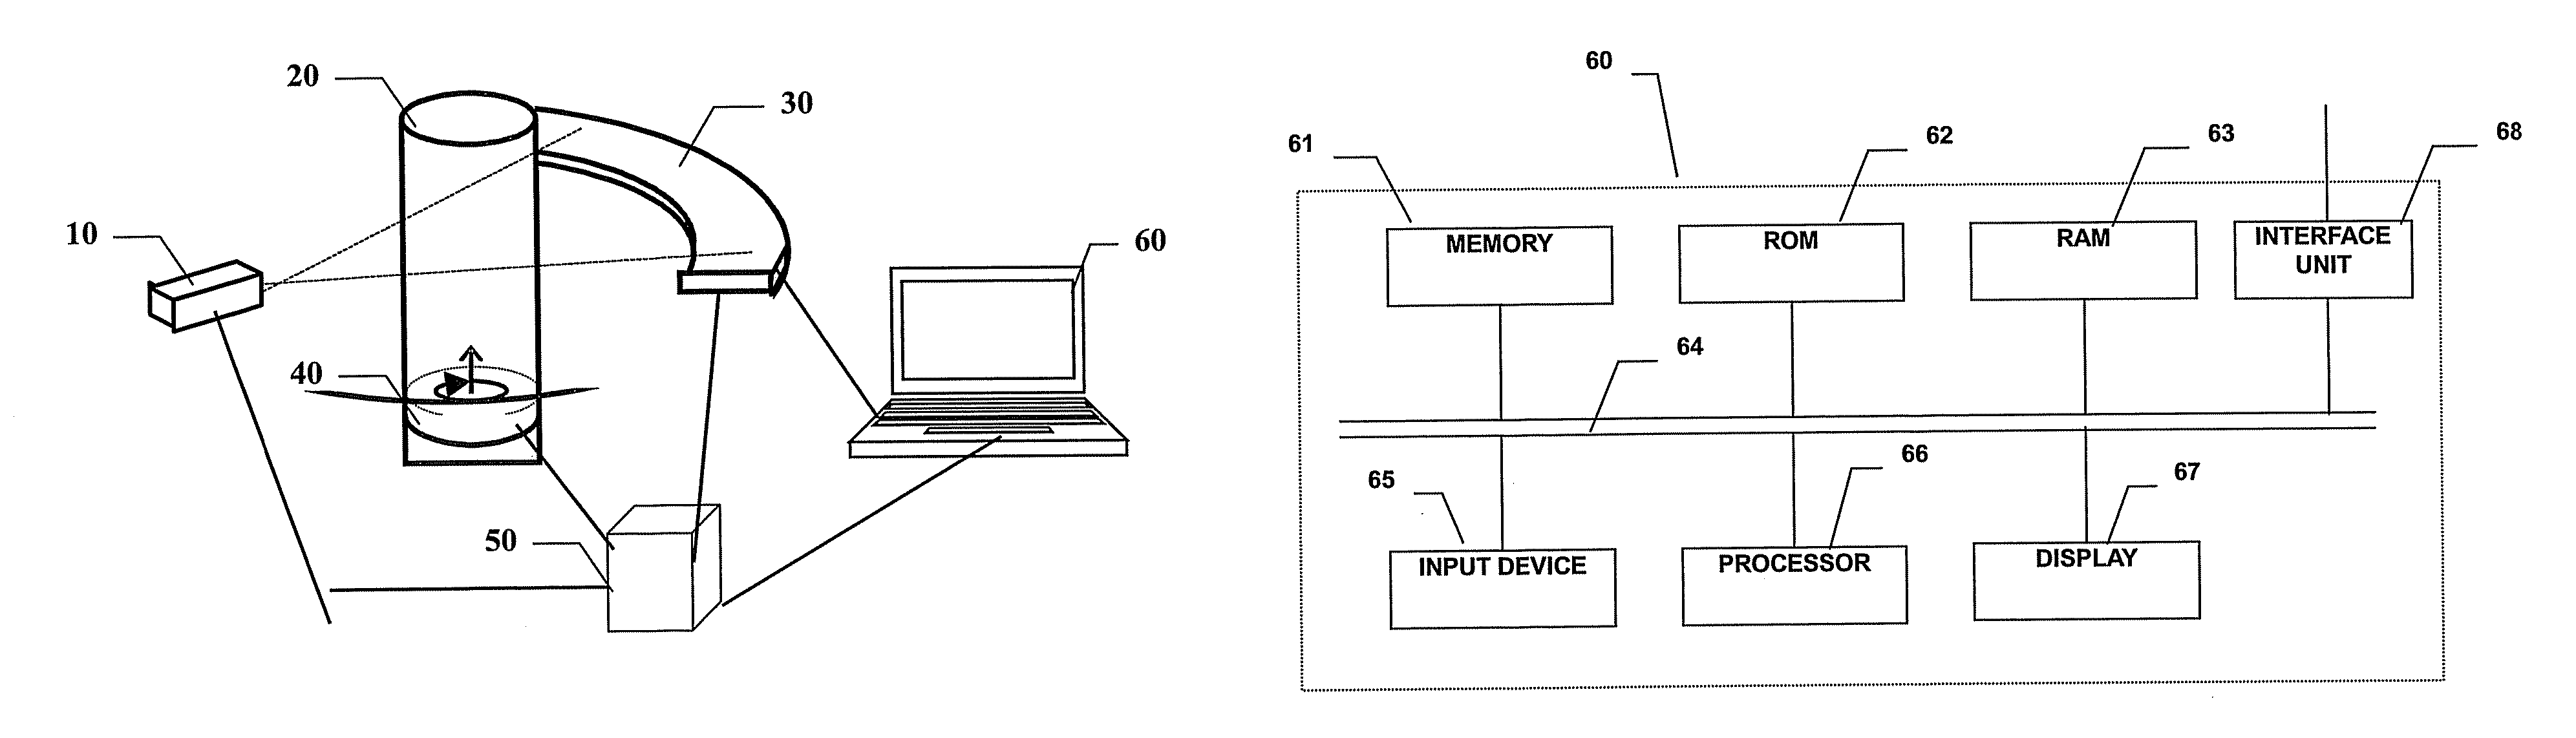 Method and device for inspection of liquid articles